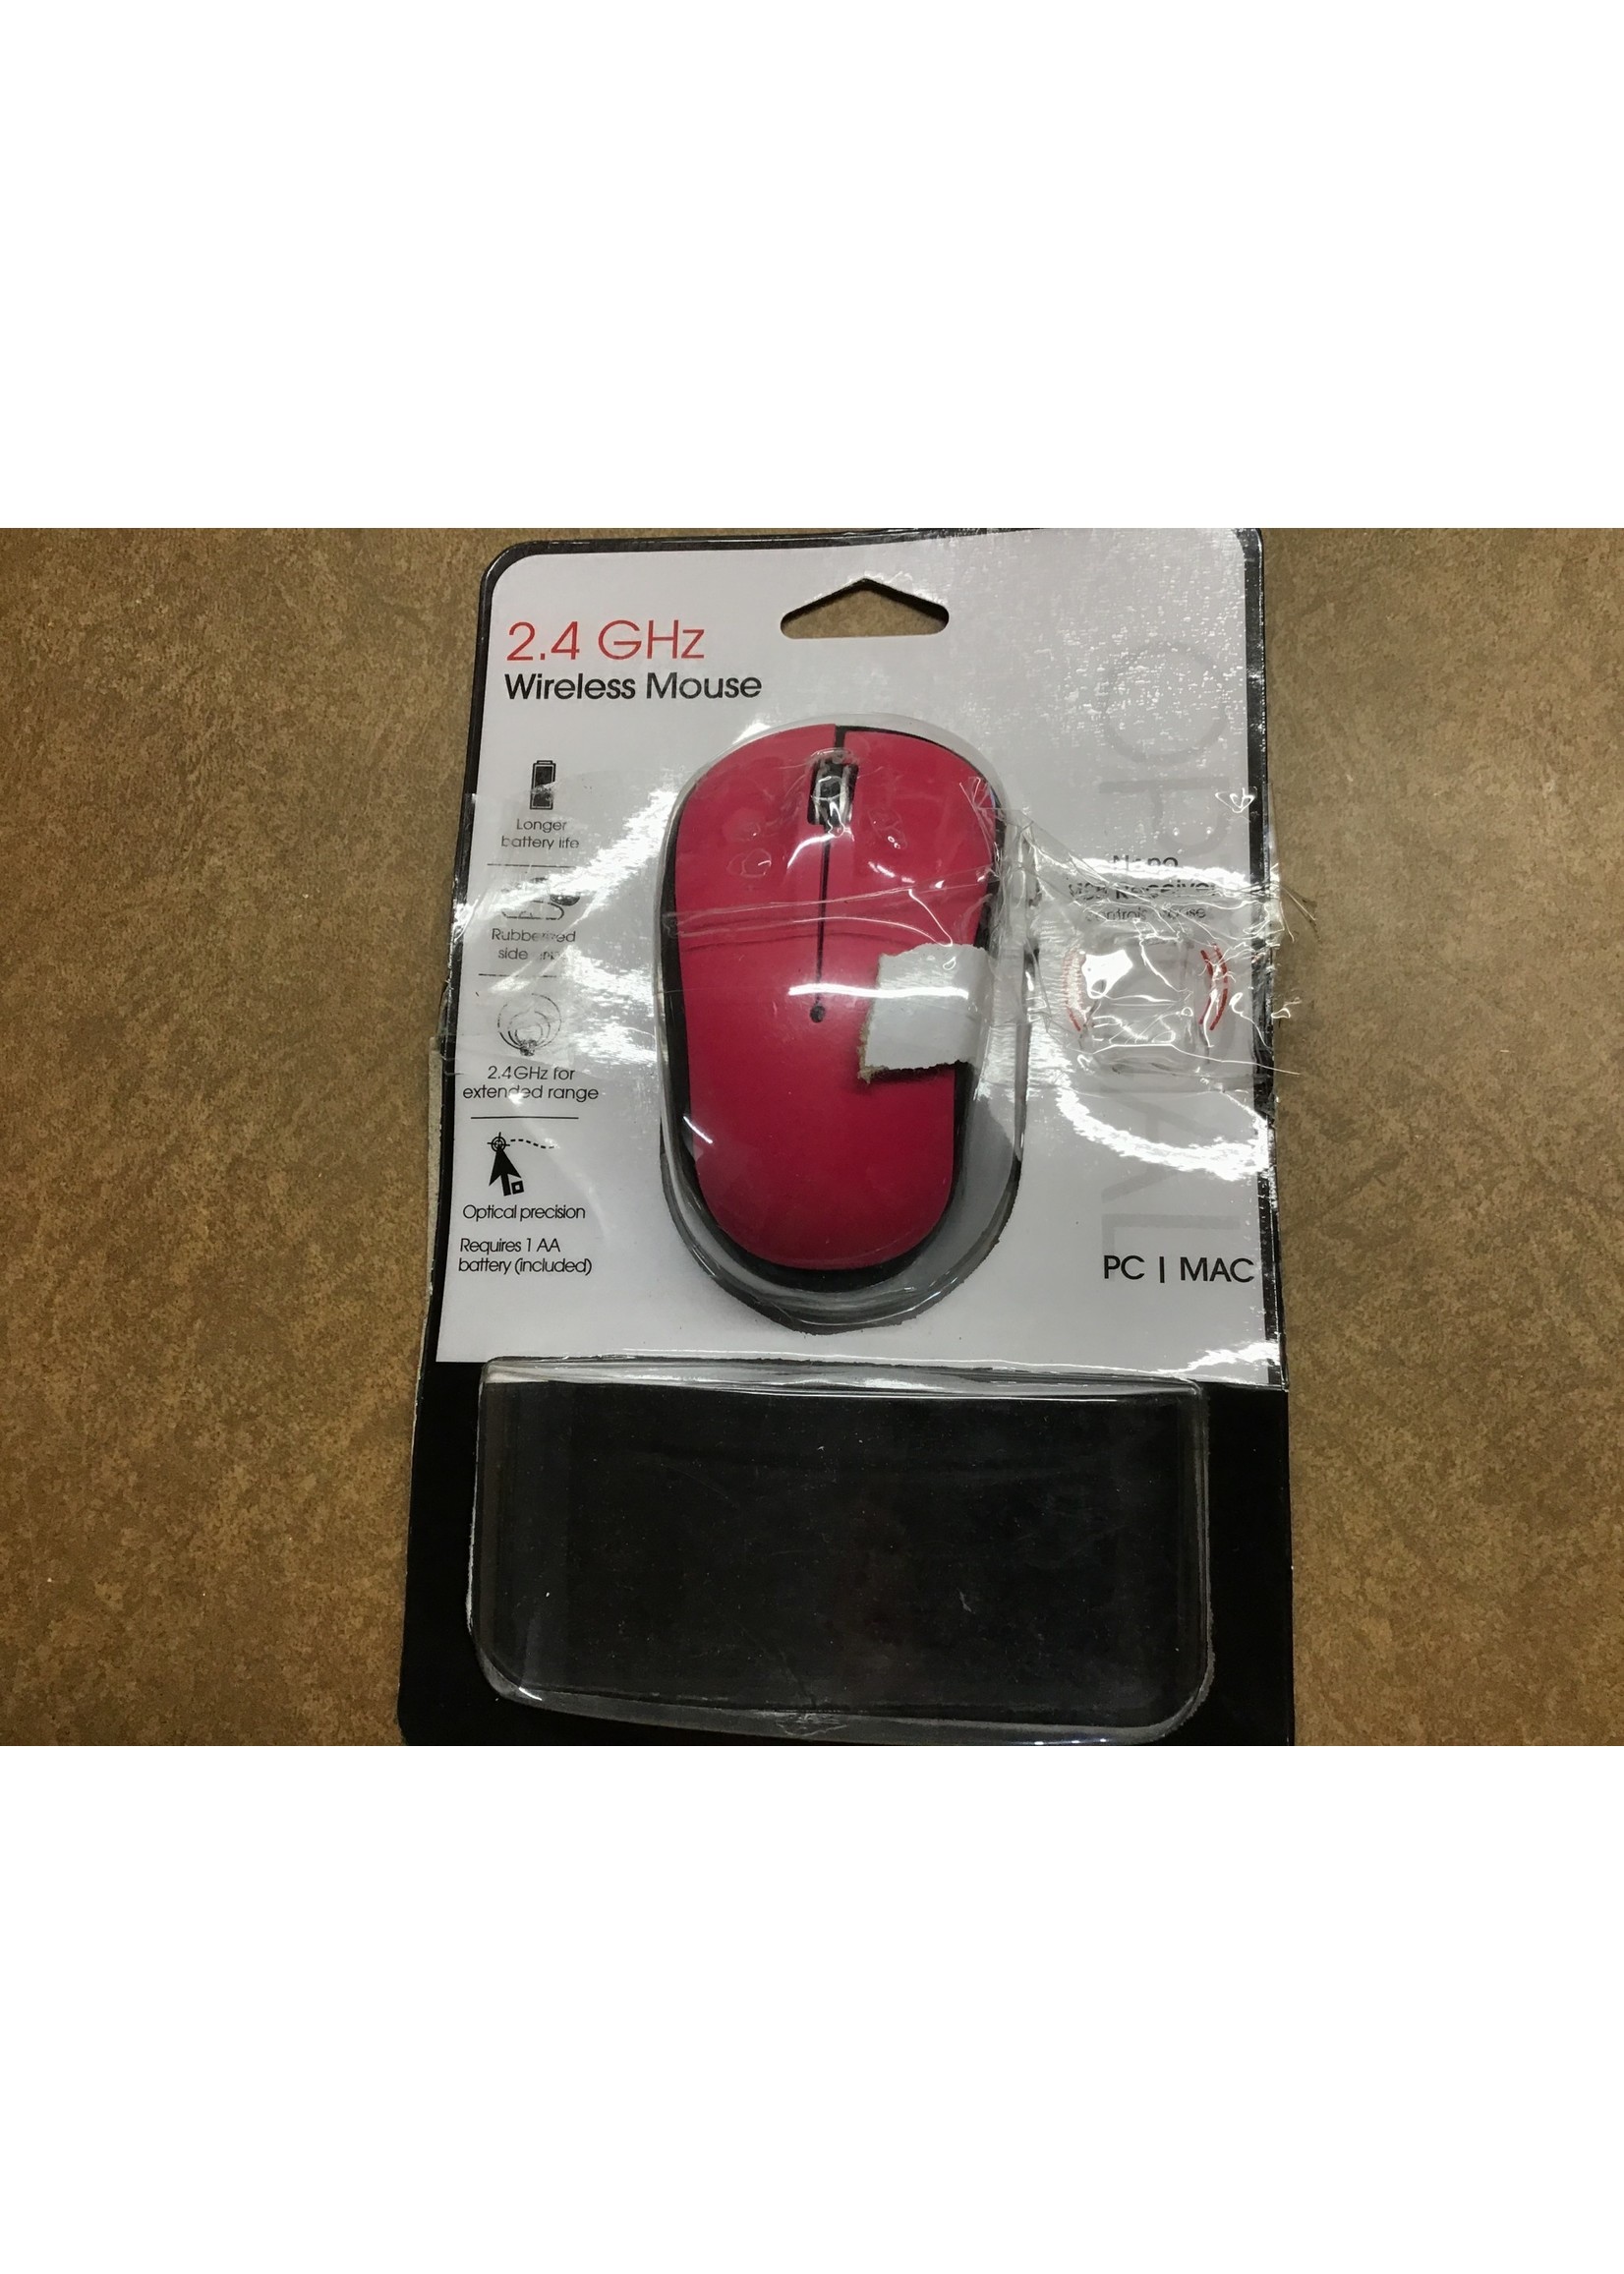 Missing USB receiver-Power Gear Wireless Mouse - Pink